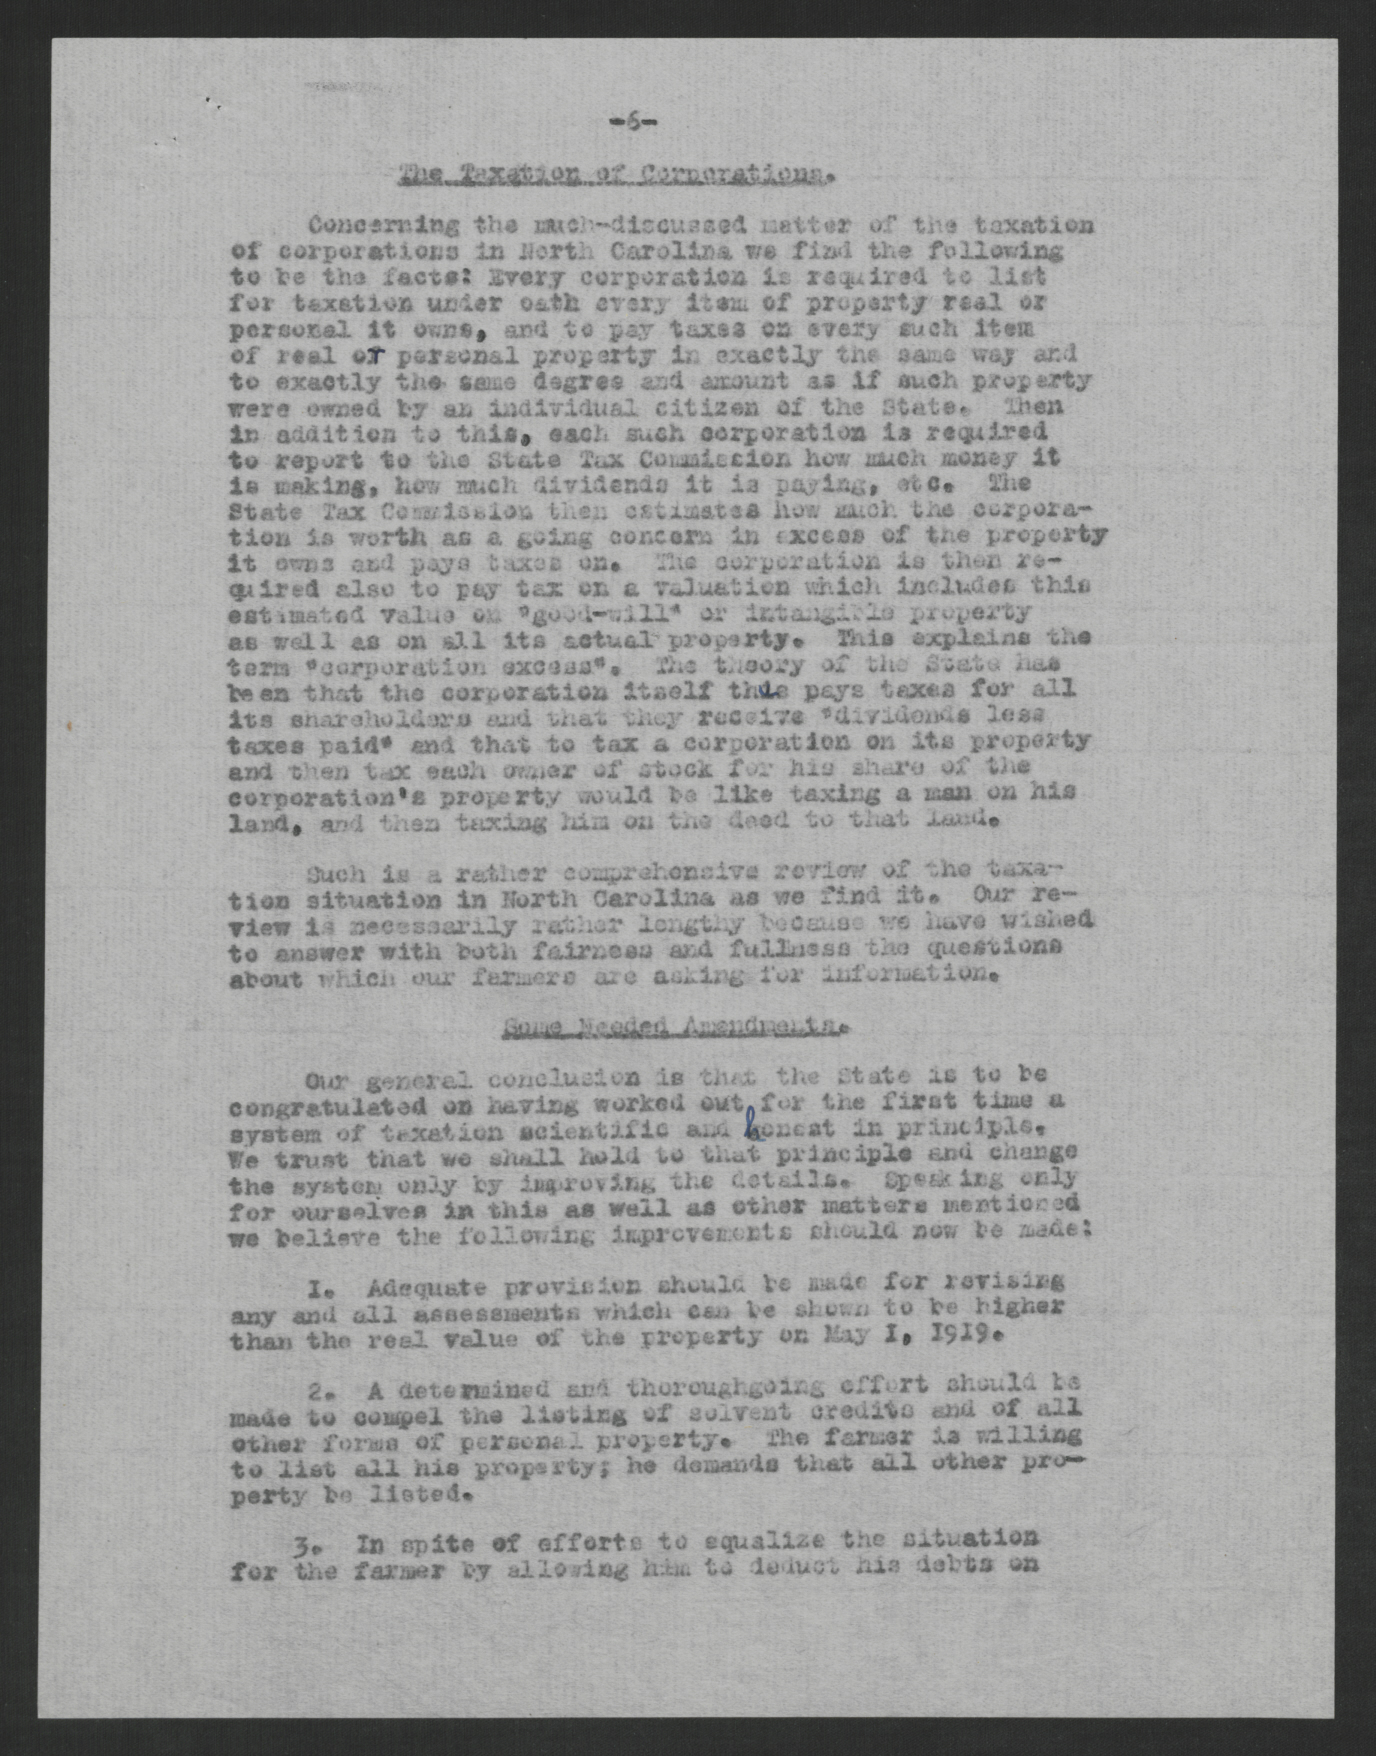 Report of the Legislative Committee of the North Carolina State Board of Agriculture, August 18, 1920, page 6